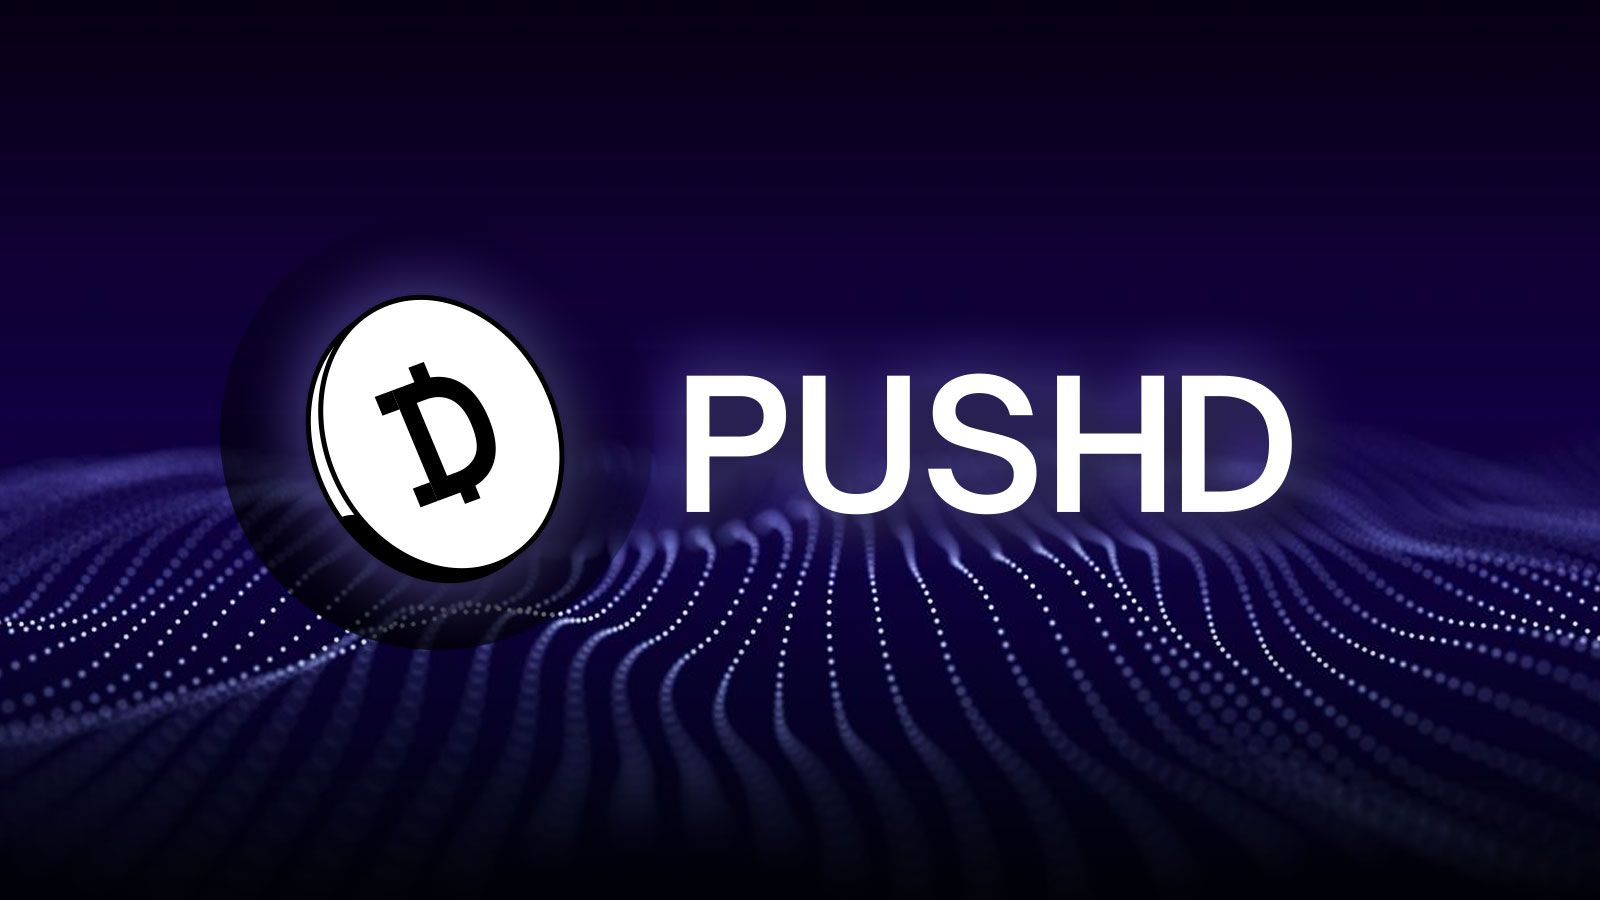 Pushd (PUSHD) Pre-Sale In Focus For Investors in January, as Dogecoin (DOGE) and Cardano (ADA) Market Caps Surge